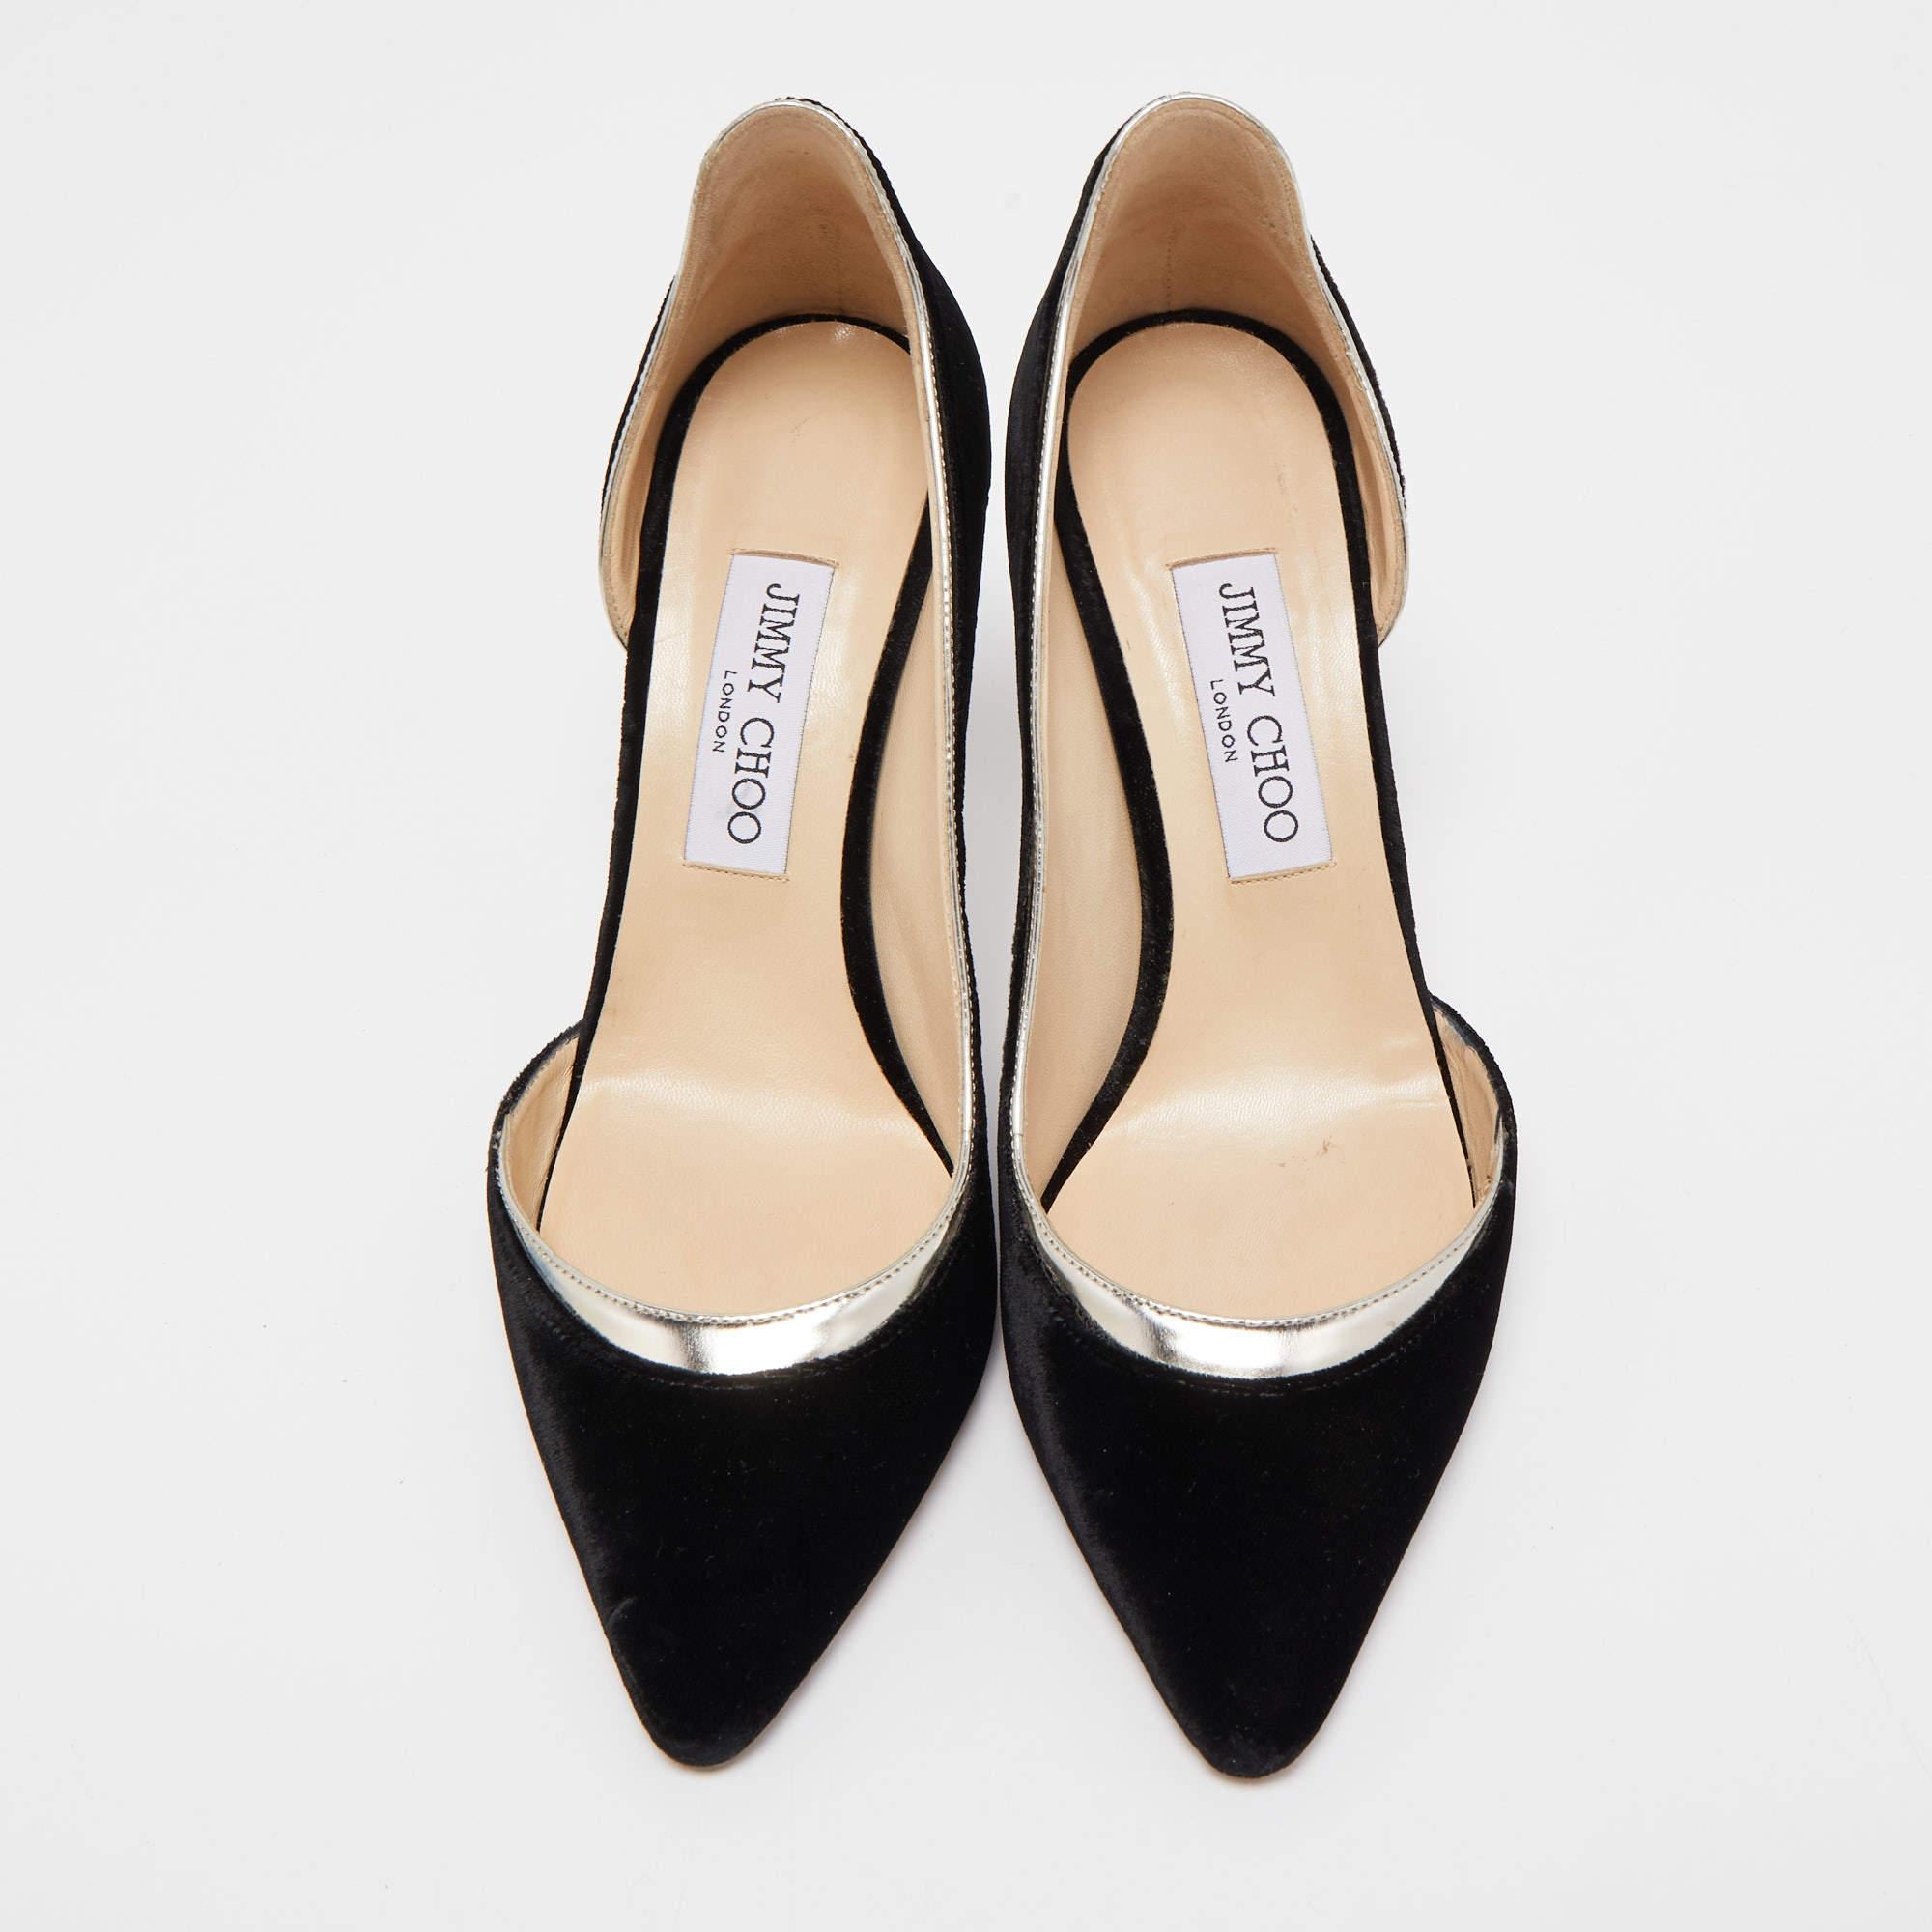 Wonderfully-crafted shoes added with notable elements to fit well and pair perfectly with all your plans. Make these designer pumps yours today!

Includes: Original Box

